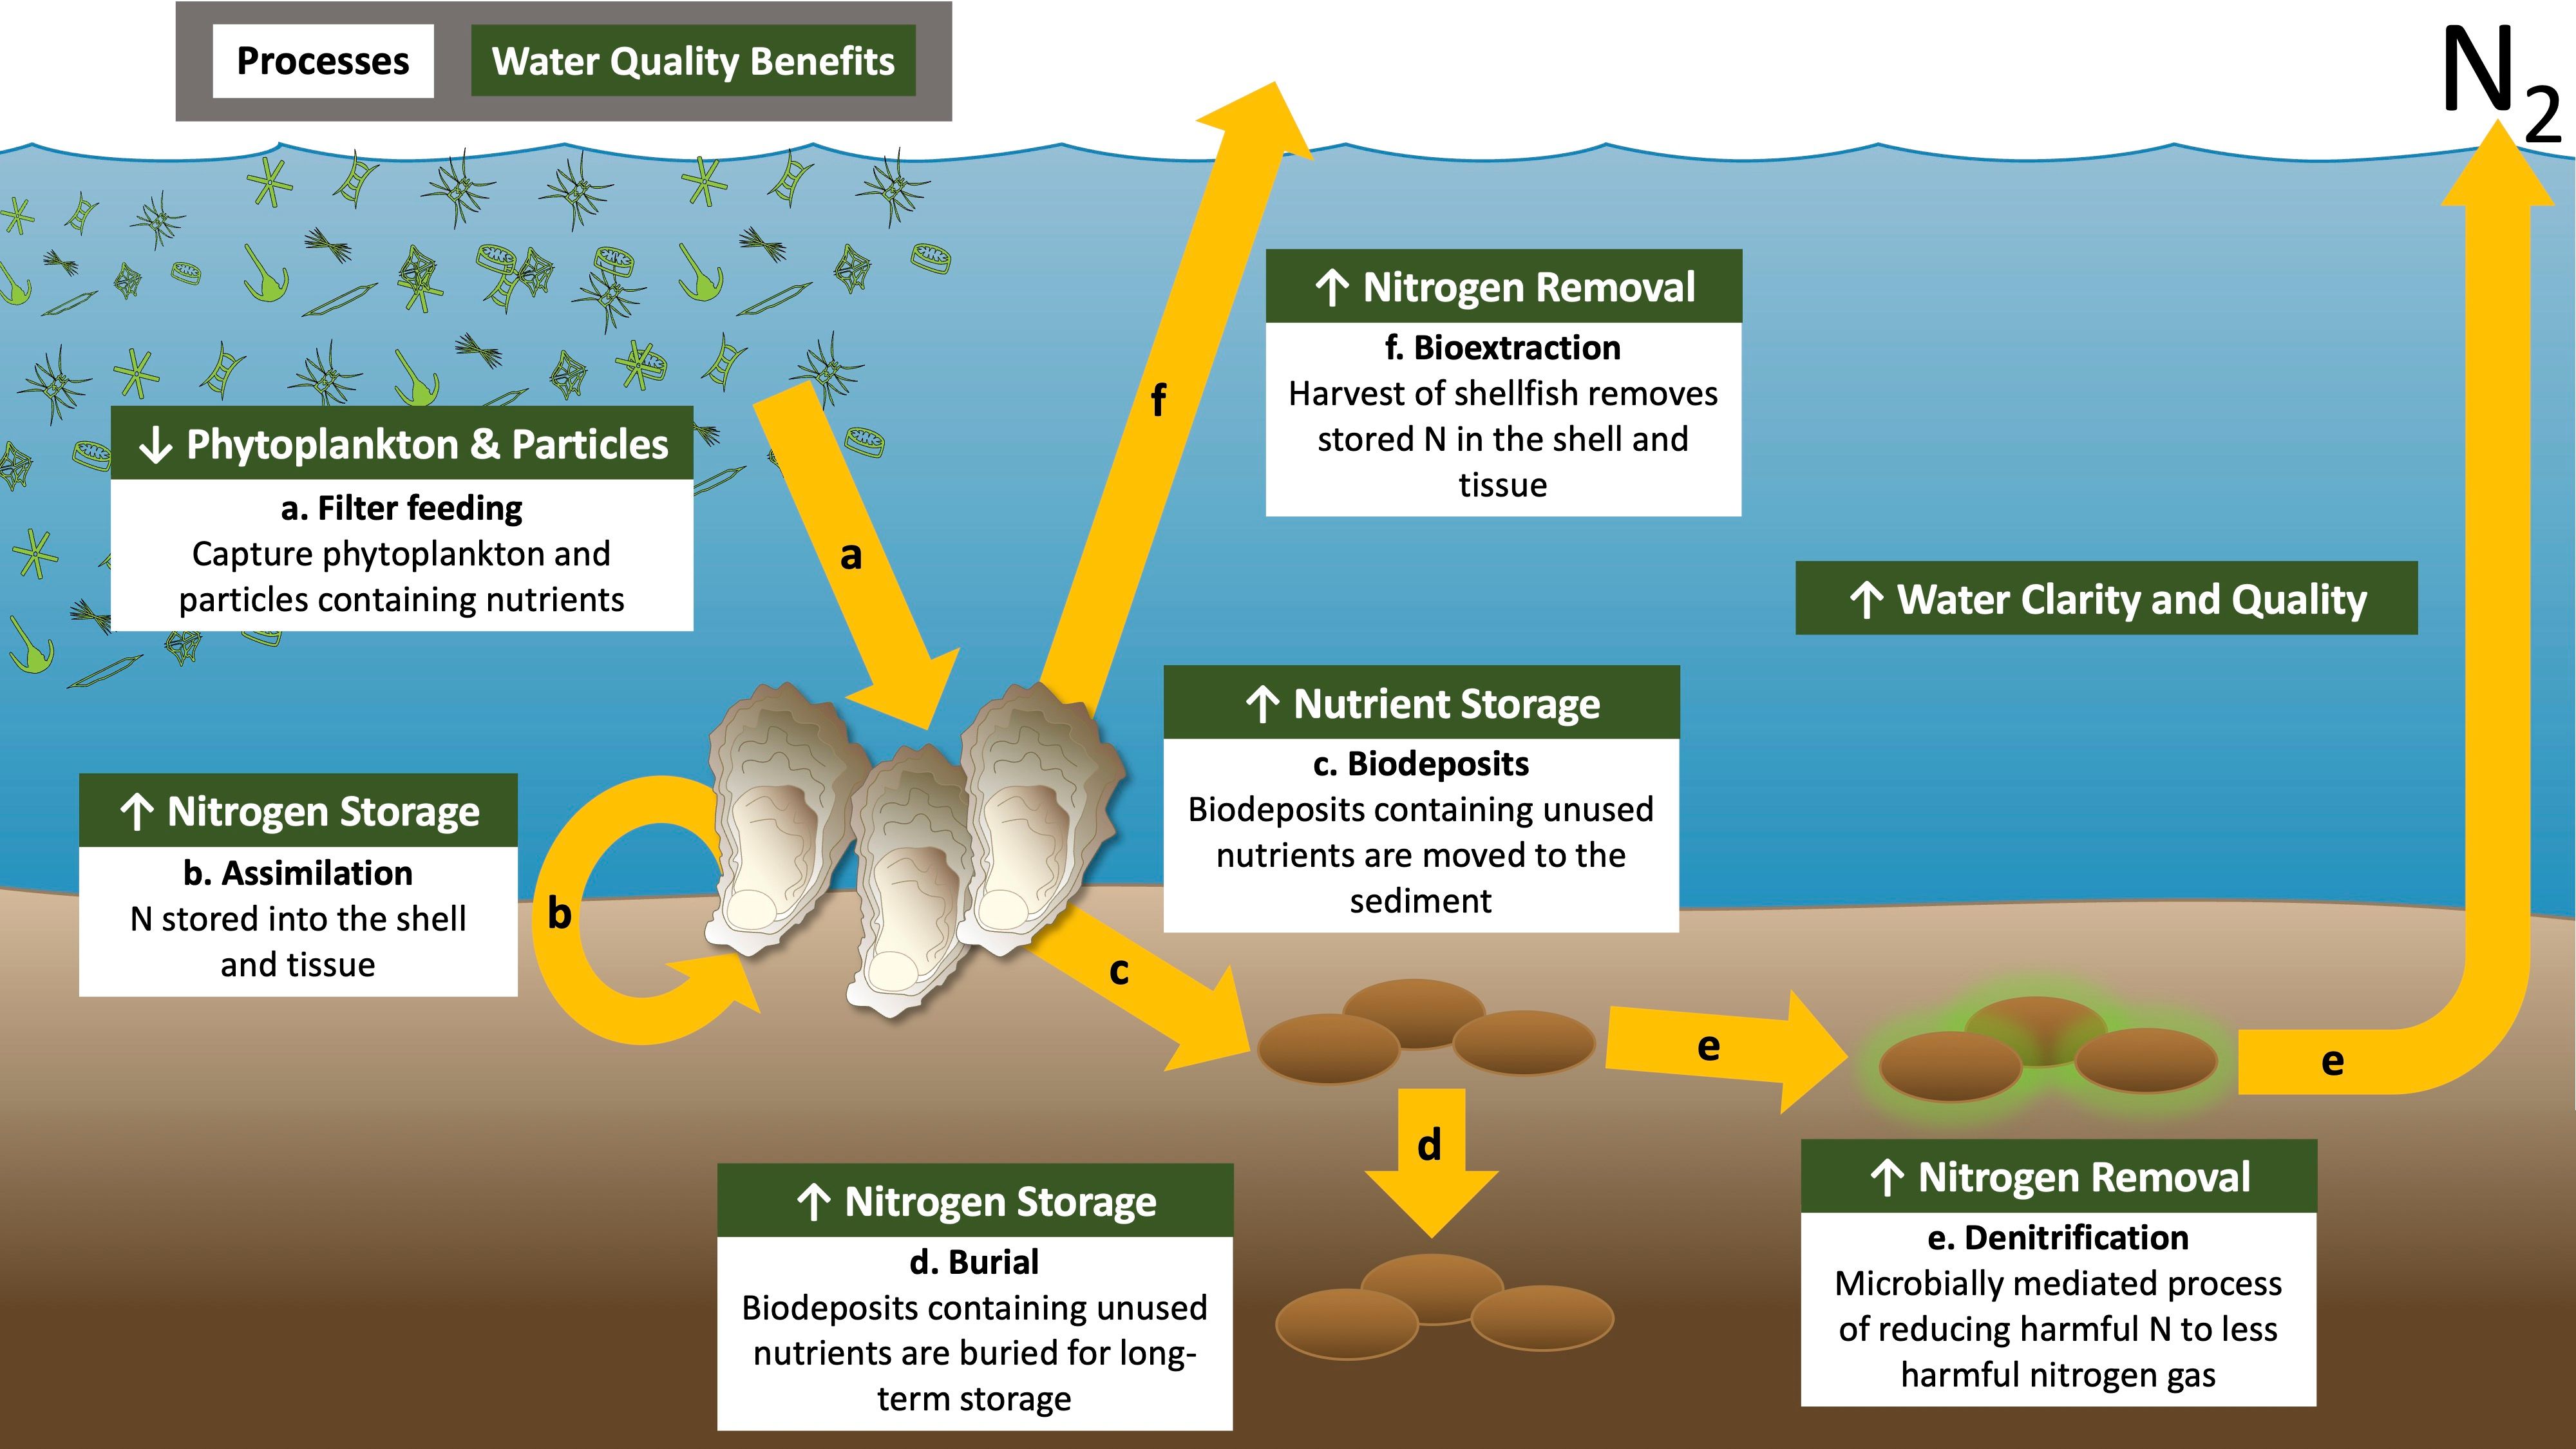 Ecological processes and water-quality benefits associated with oysters improve water clarity and provide nitrogen removal. 